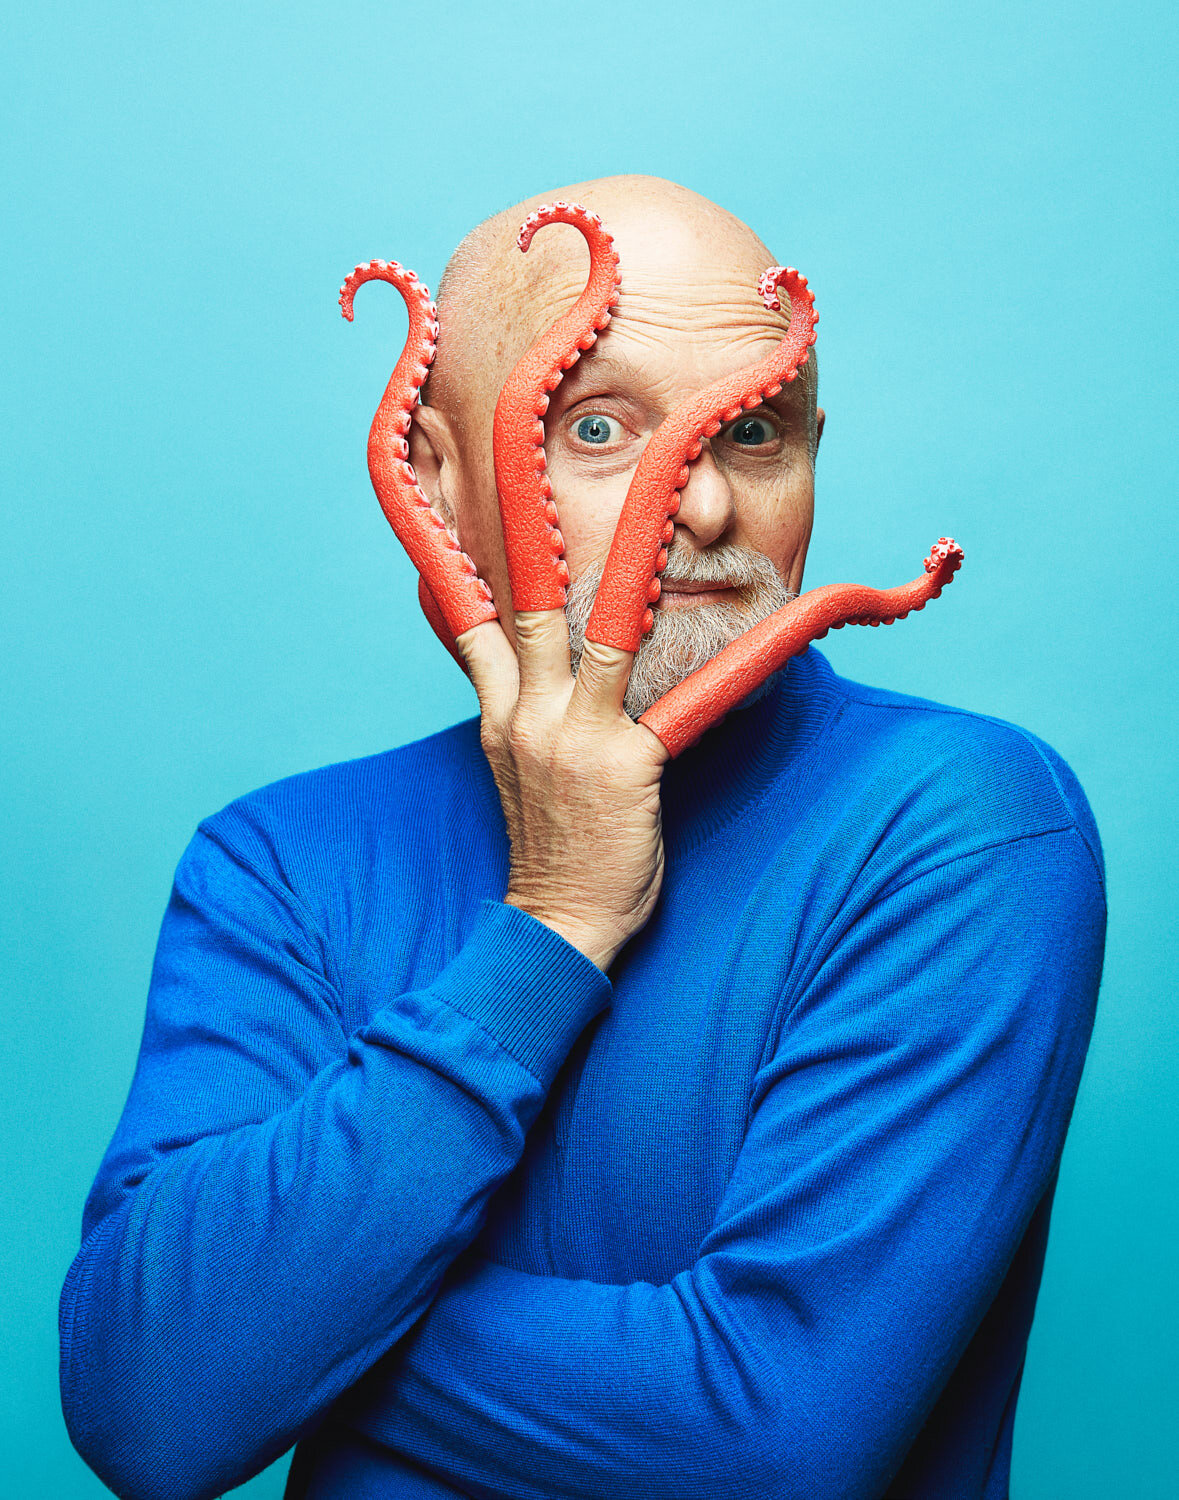 quirky portrait of composer William Neil peaking through octopus tentacles that he is wearing on his fingers by portrait photographer Hanna Agar